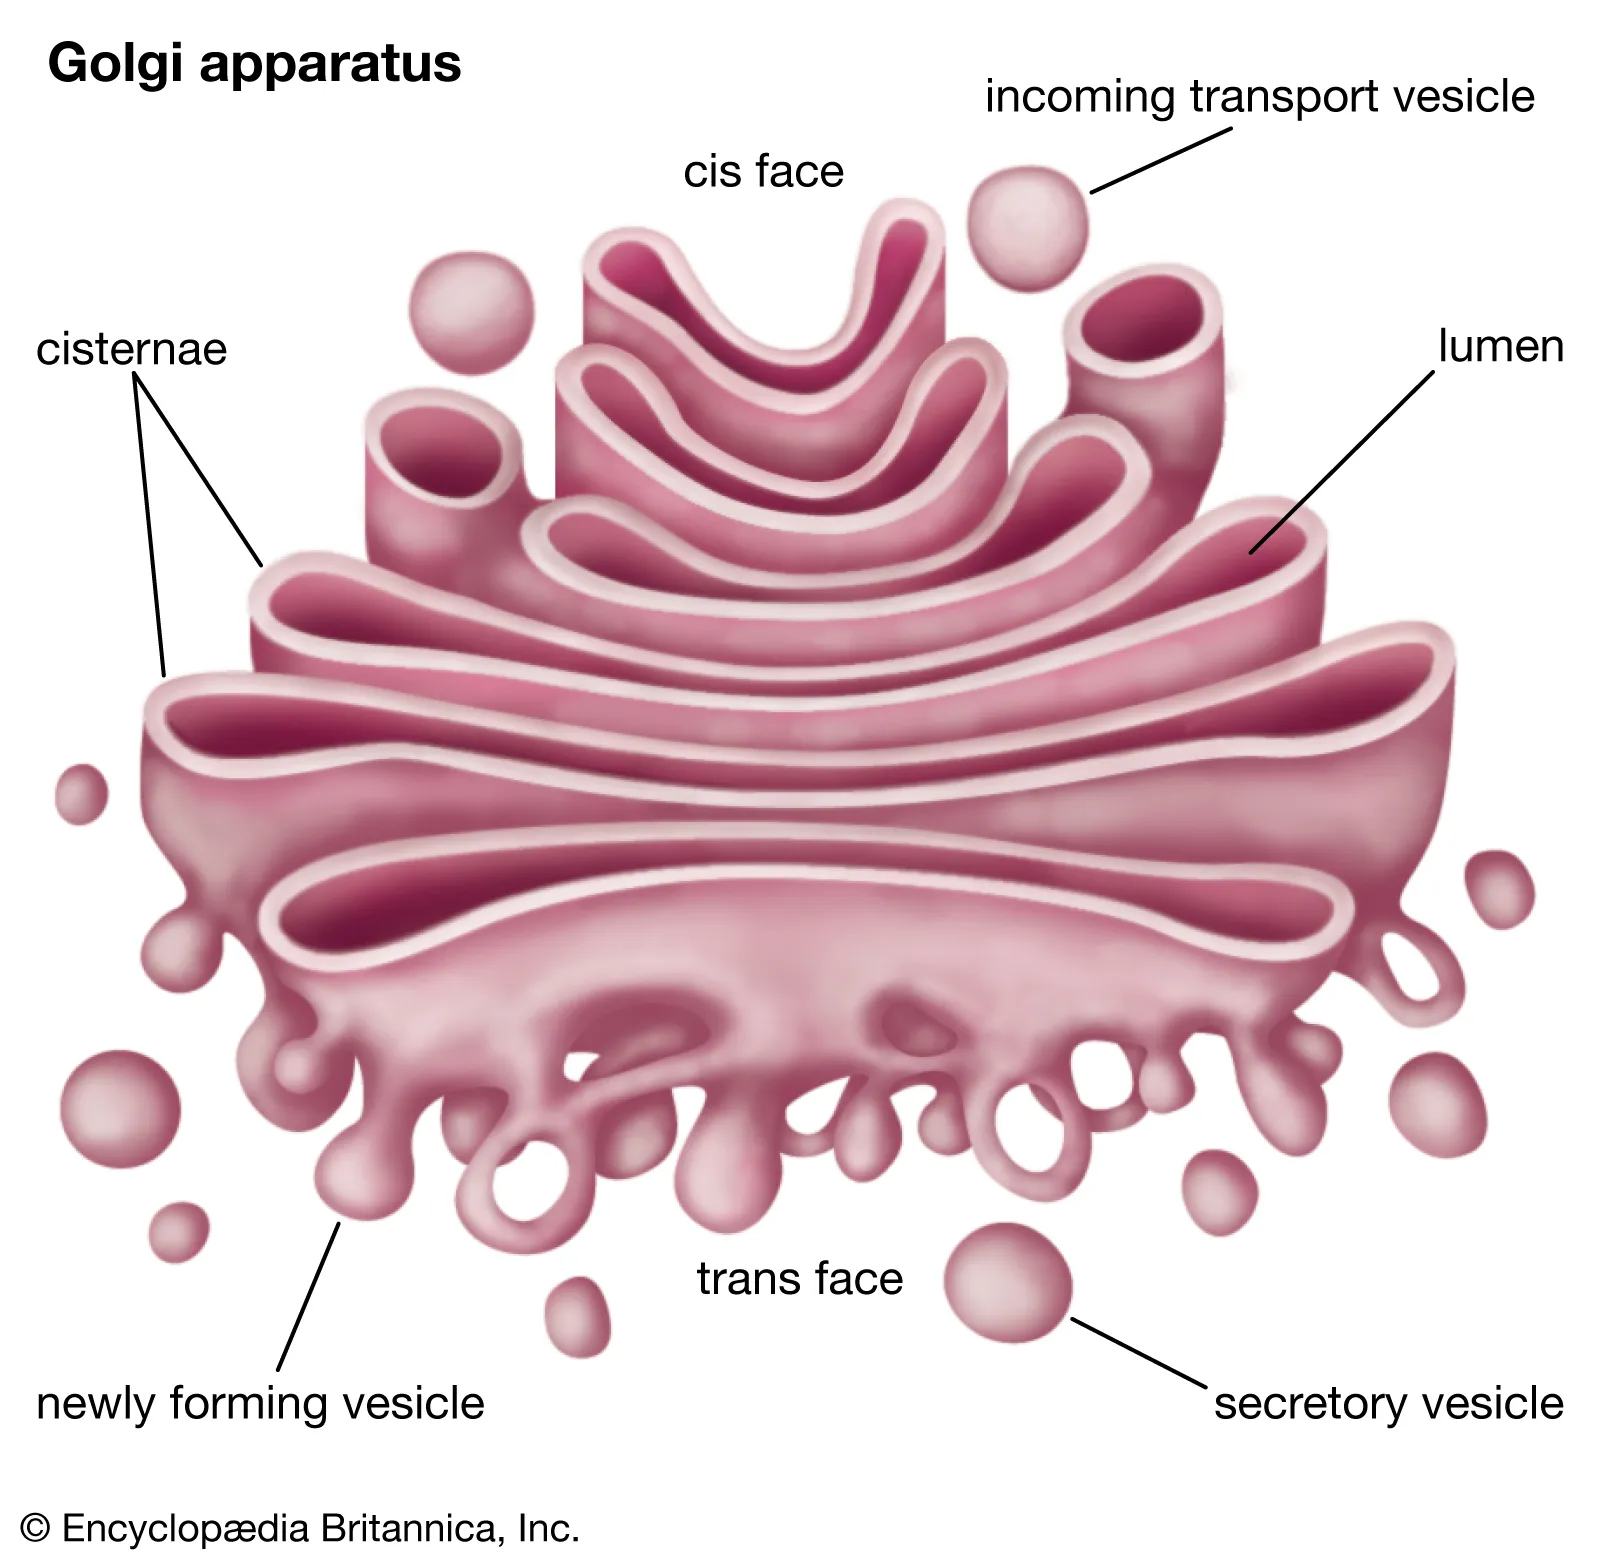 <p><strong>Structure of Golgi Apparatus:</strong></p><p><span class="tt-bg-yellow">Single-membrane</span> compartment.</p><p>Consists of <span class="tt-bg-yellow">4 to 8 stacked layers of thin, flat, enclosed vesicles called cisternae.</span></p><p>Cisternae lie near one side of the nucleus.</p><p><strong>Compartments within Golgi Apparatus:</strong></p><p><span class="tt-bg-blue">Three networks</span> or compartments:</p><p><strong>Cis Compartment:</strong></p><p>First cisternae structure.</p><p>Located closer to the nucleus.</p><p><strong>Medial Compartment:</strong></p><p>Intermediate structures between cis and trans compartments.</p><p><strong>Trans Compartment:</strong></p><p>Final structure.</p><p>Located closer to the cell membrane.</p>